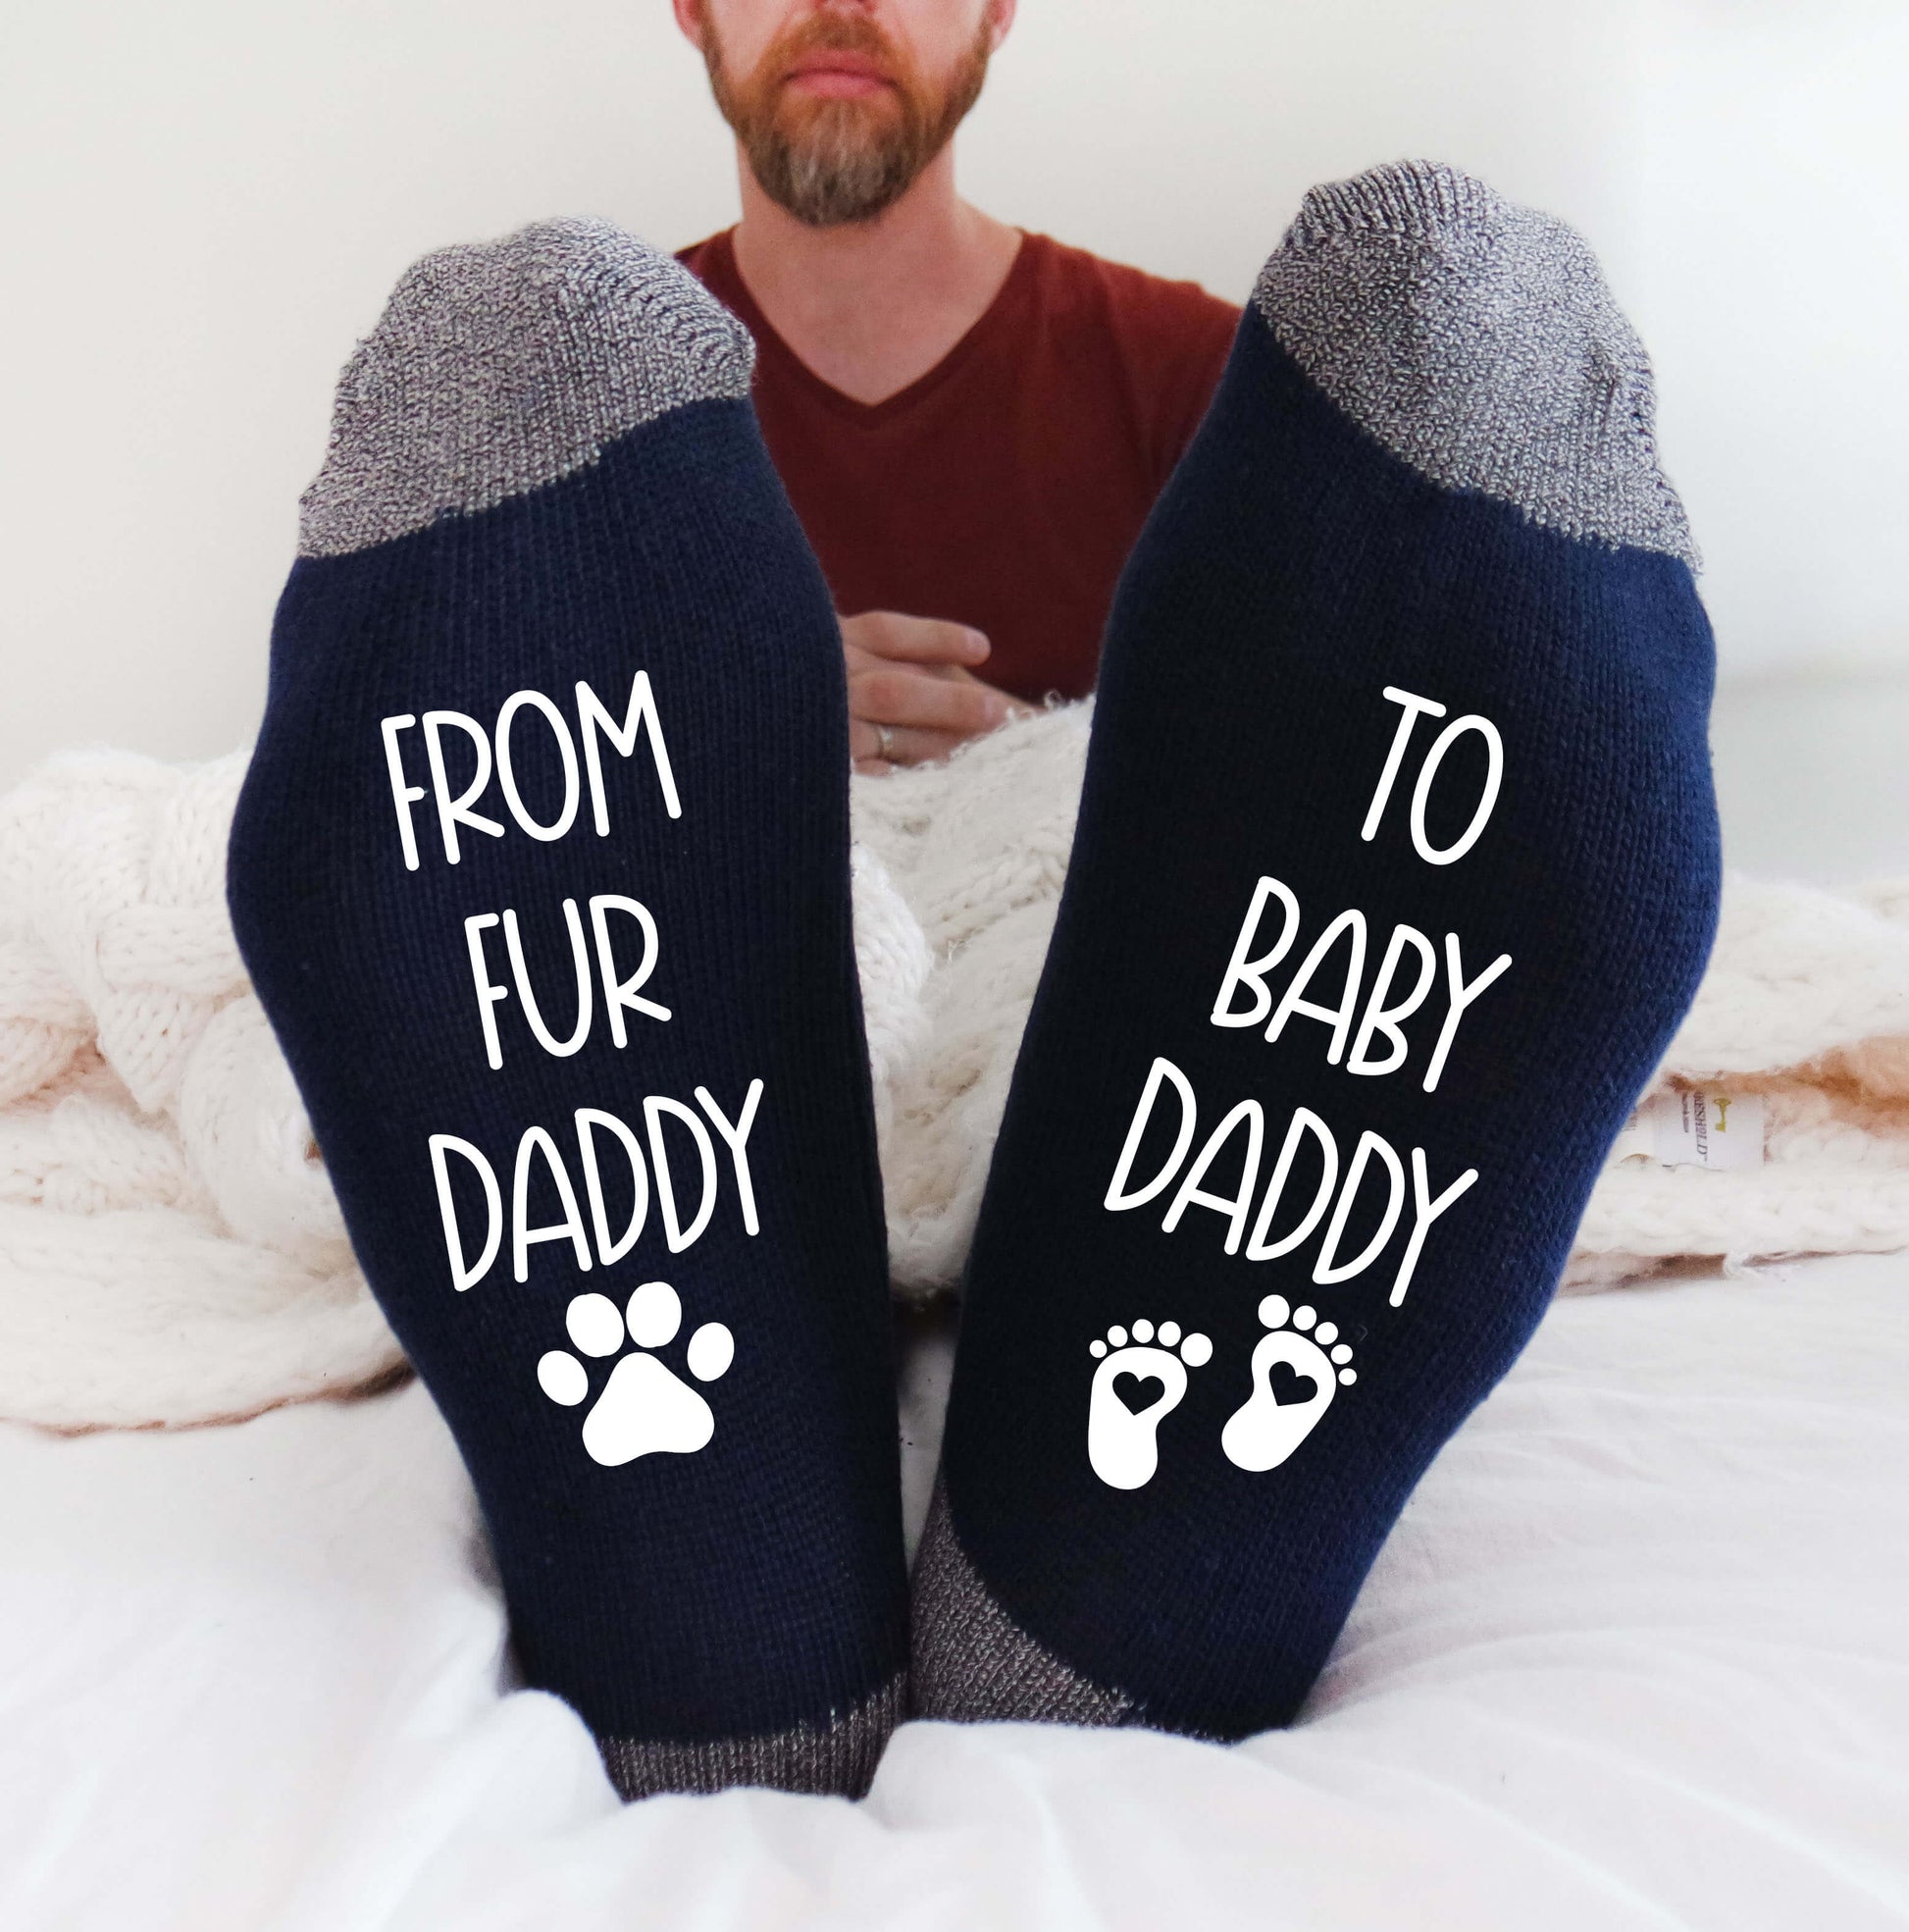 socks with the heartwarming phrase 'From fur daddy to baby daddy,' celebrating the transition from pet parenting to becoming a father of a human baby.